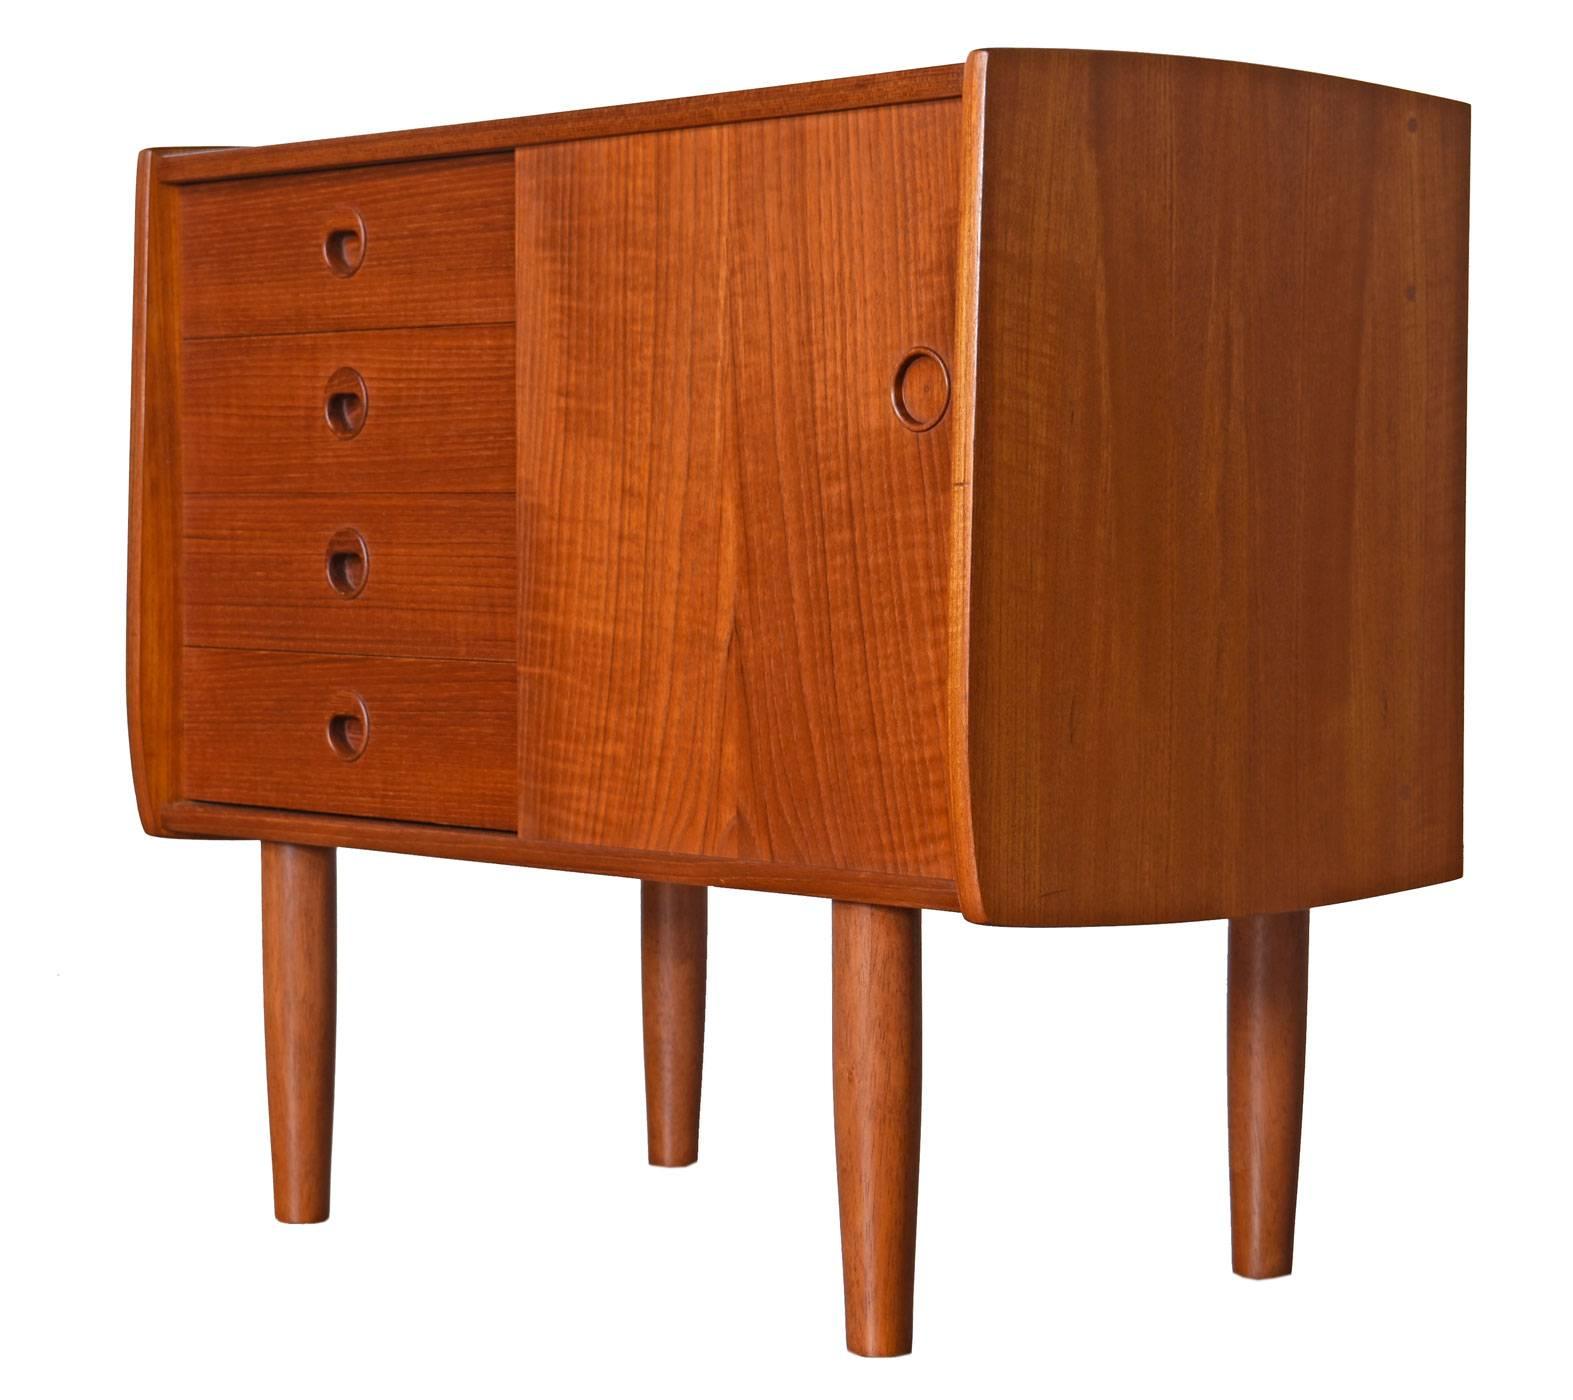 Pair of Danish modern teak oversized nightstands from the early 1960s. This rare find has had one owner up to now, has seen little use and has virtually been frozen in time. The pair are slightly different; one is a chest of three larger drawers,